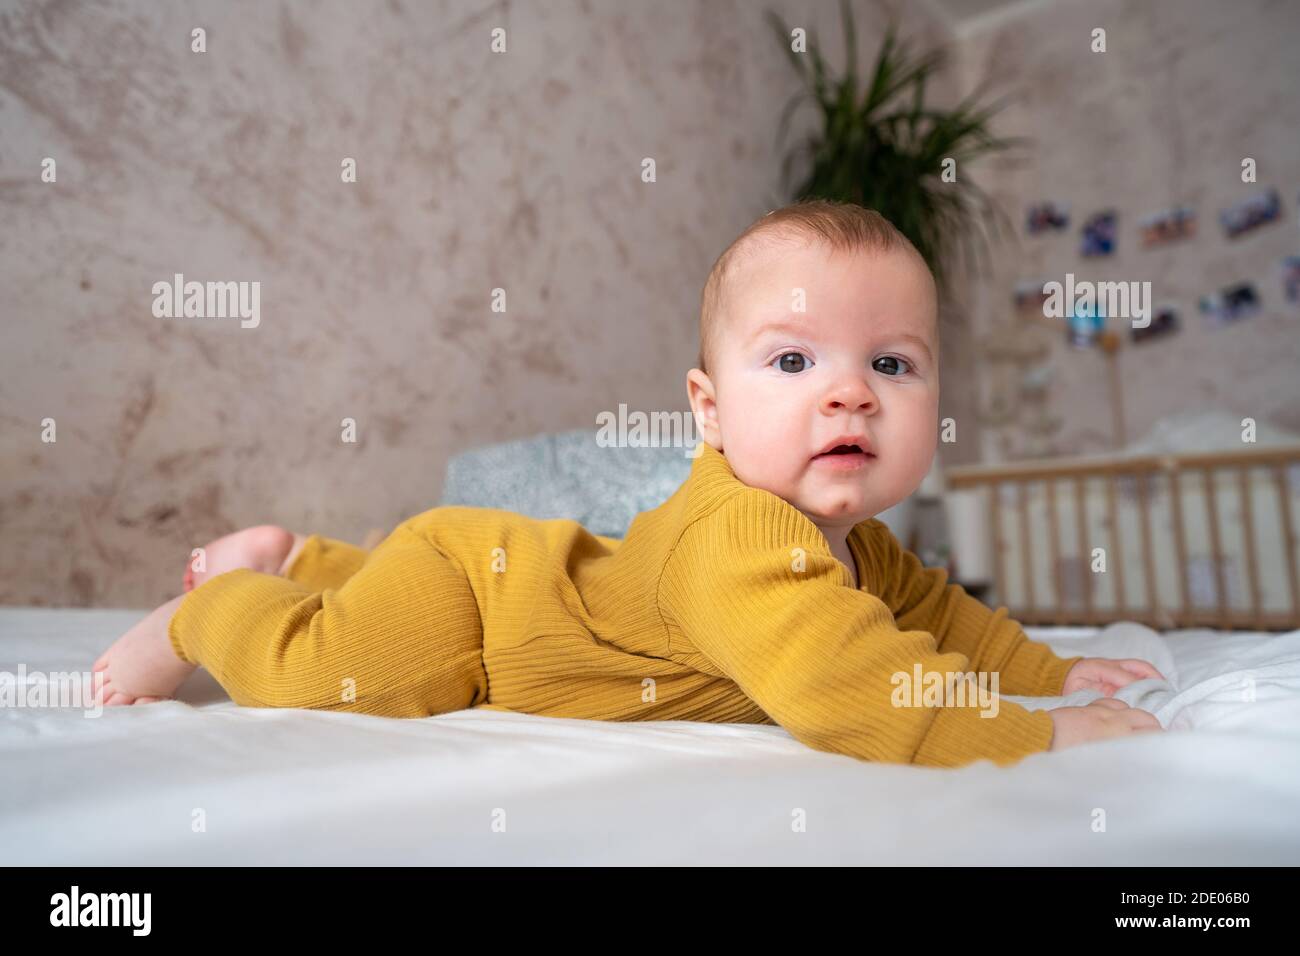 Five months baby boy. Adorable baby boy in sunny bedroom. Newborn child relaxing in bed. Nursery for children Stock Photo